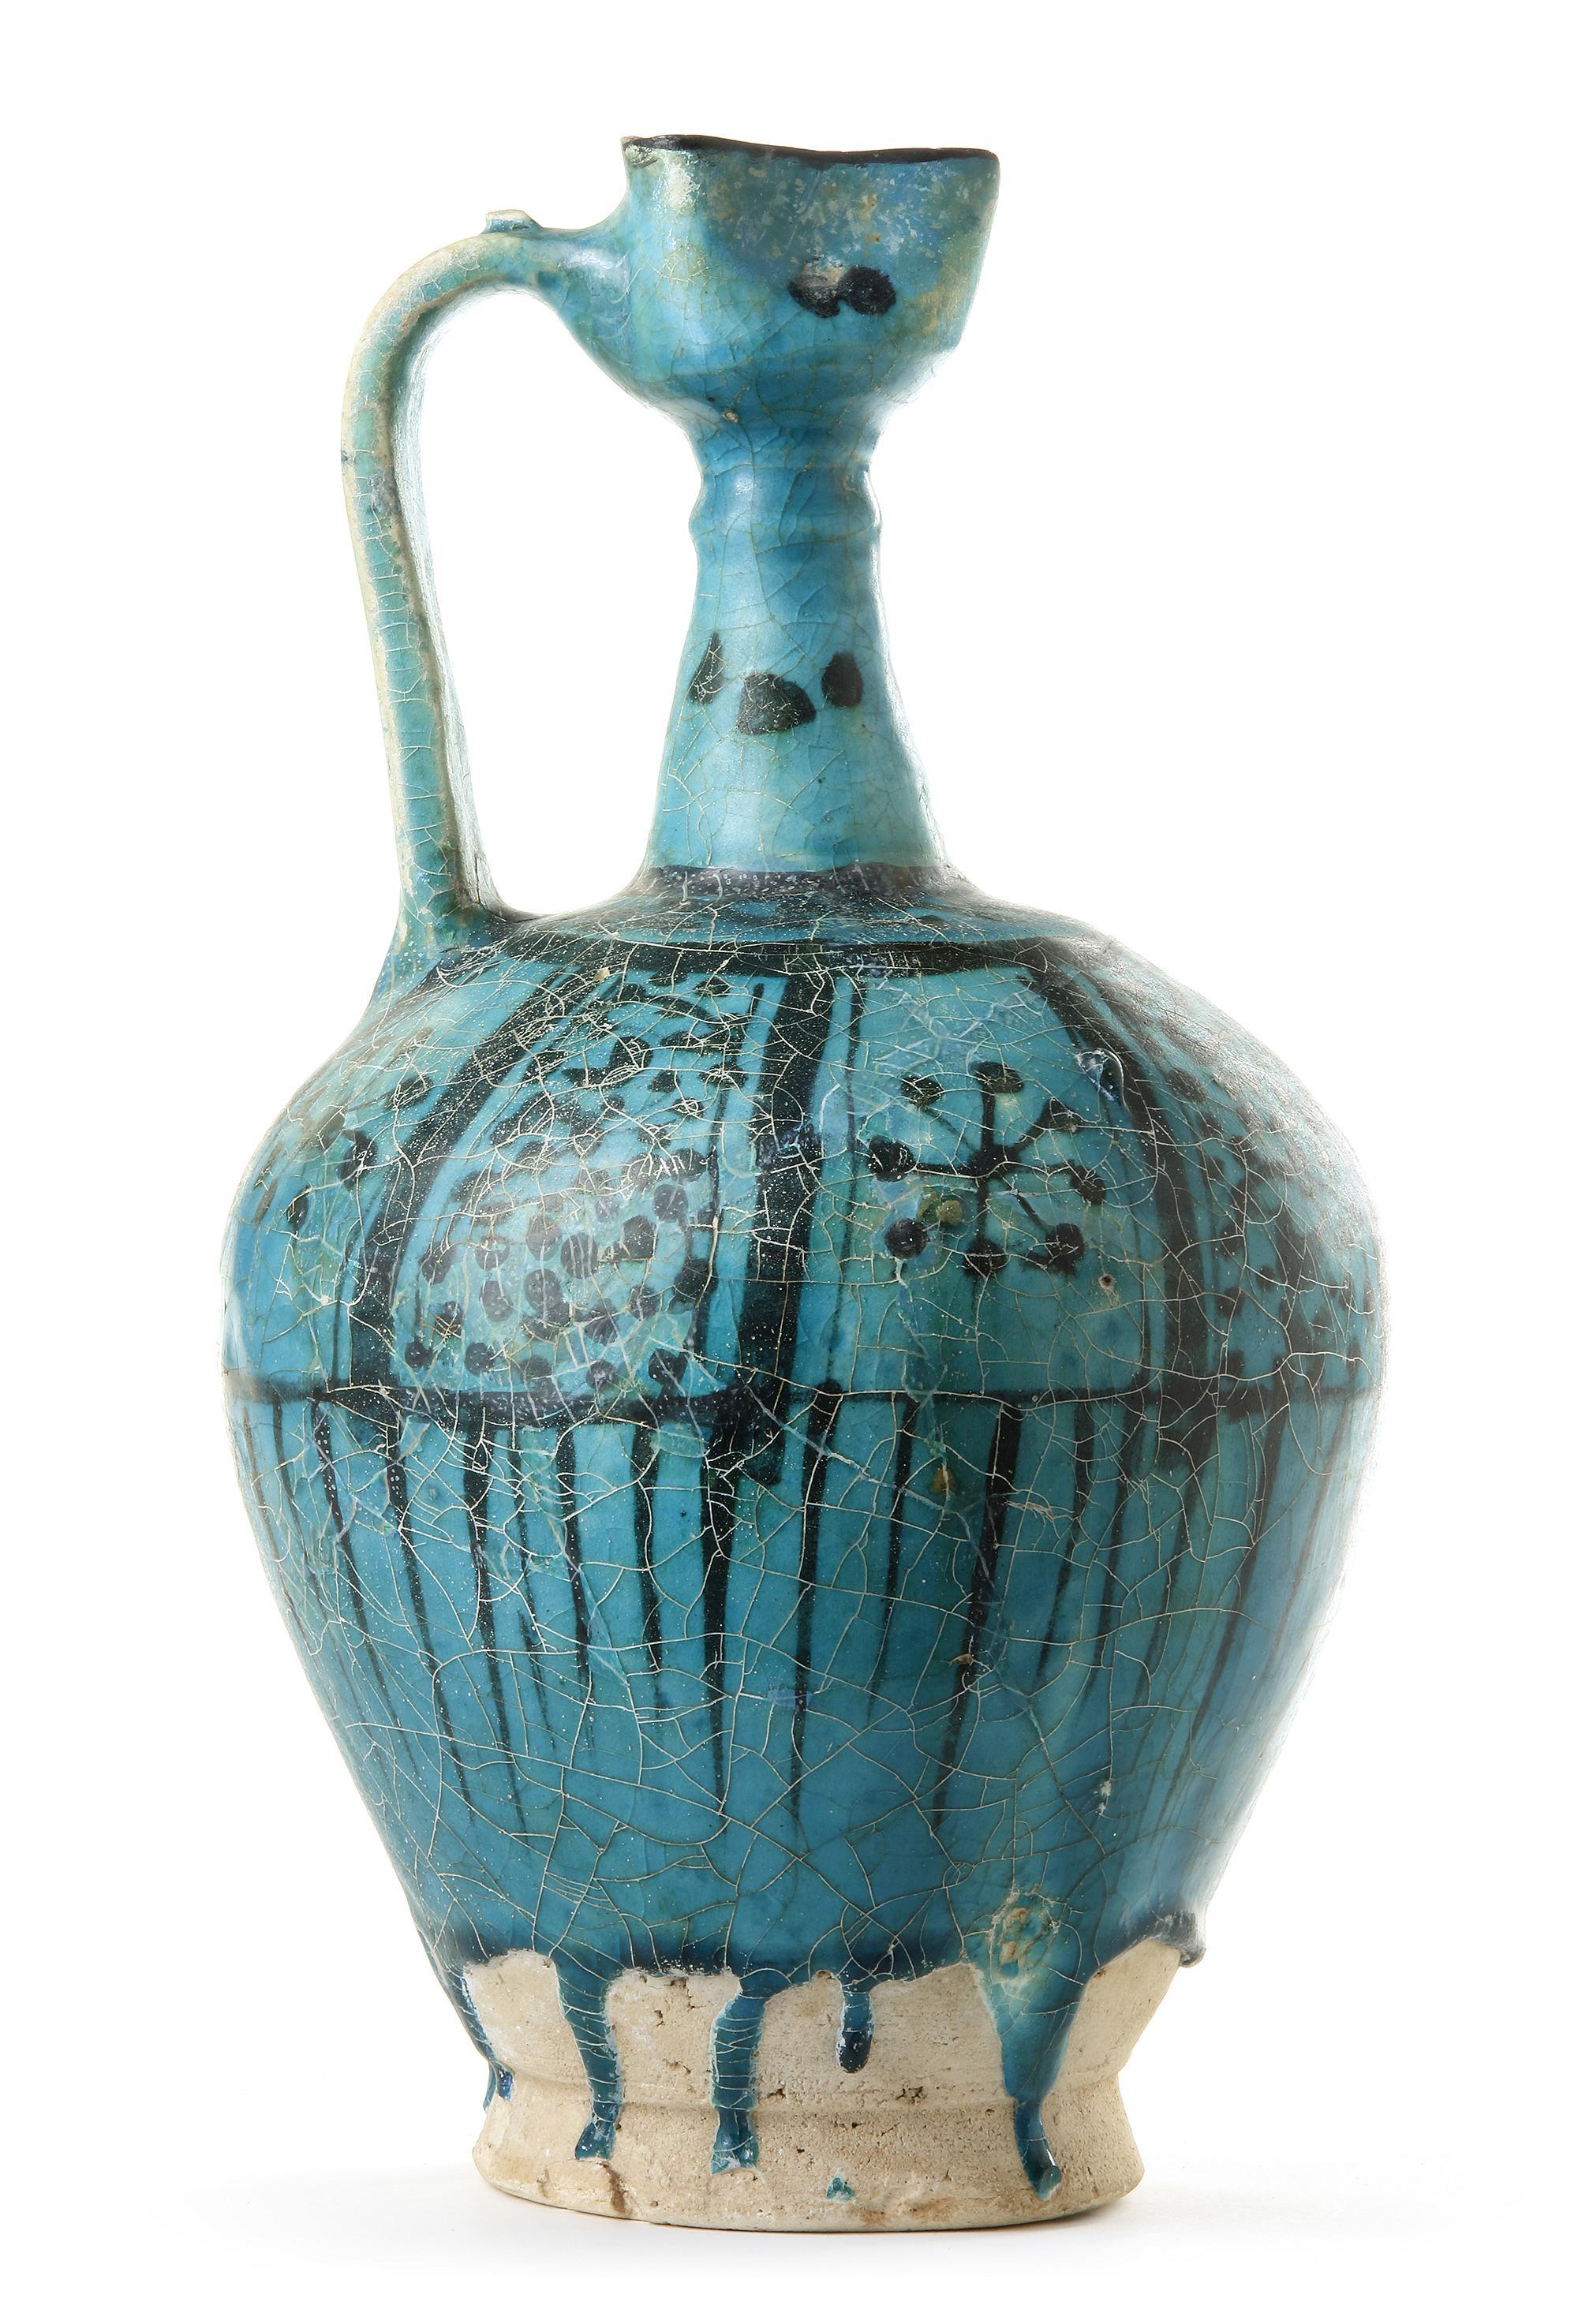 A LARGE RAQQA UNDERGLAZE PAINTED POTTERY EWER, SYRIA, 12TH-13TH CENTURY - Image 6 of 20